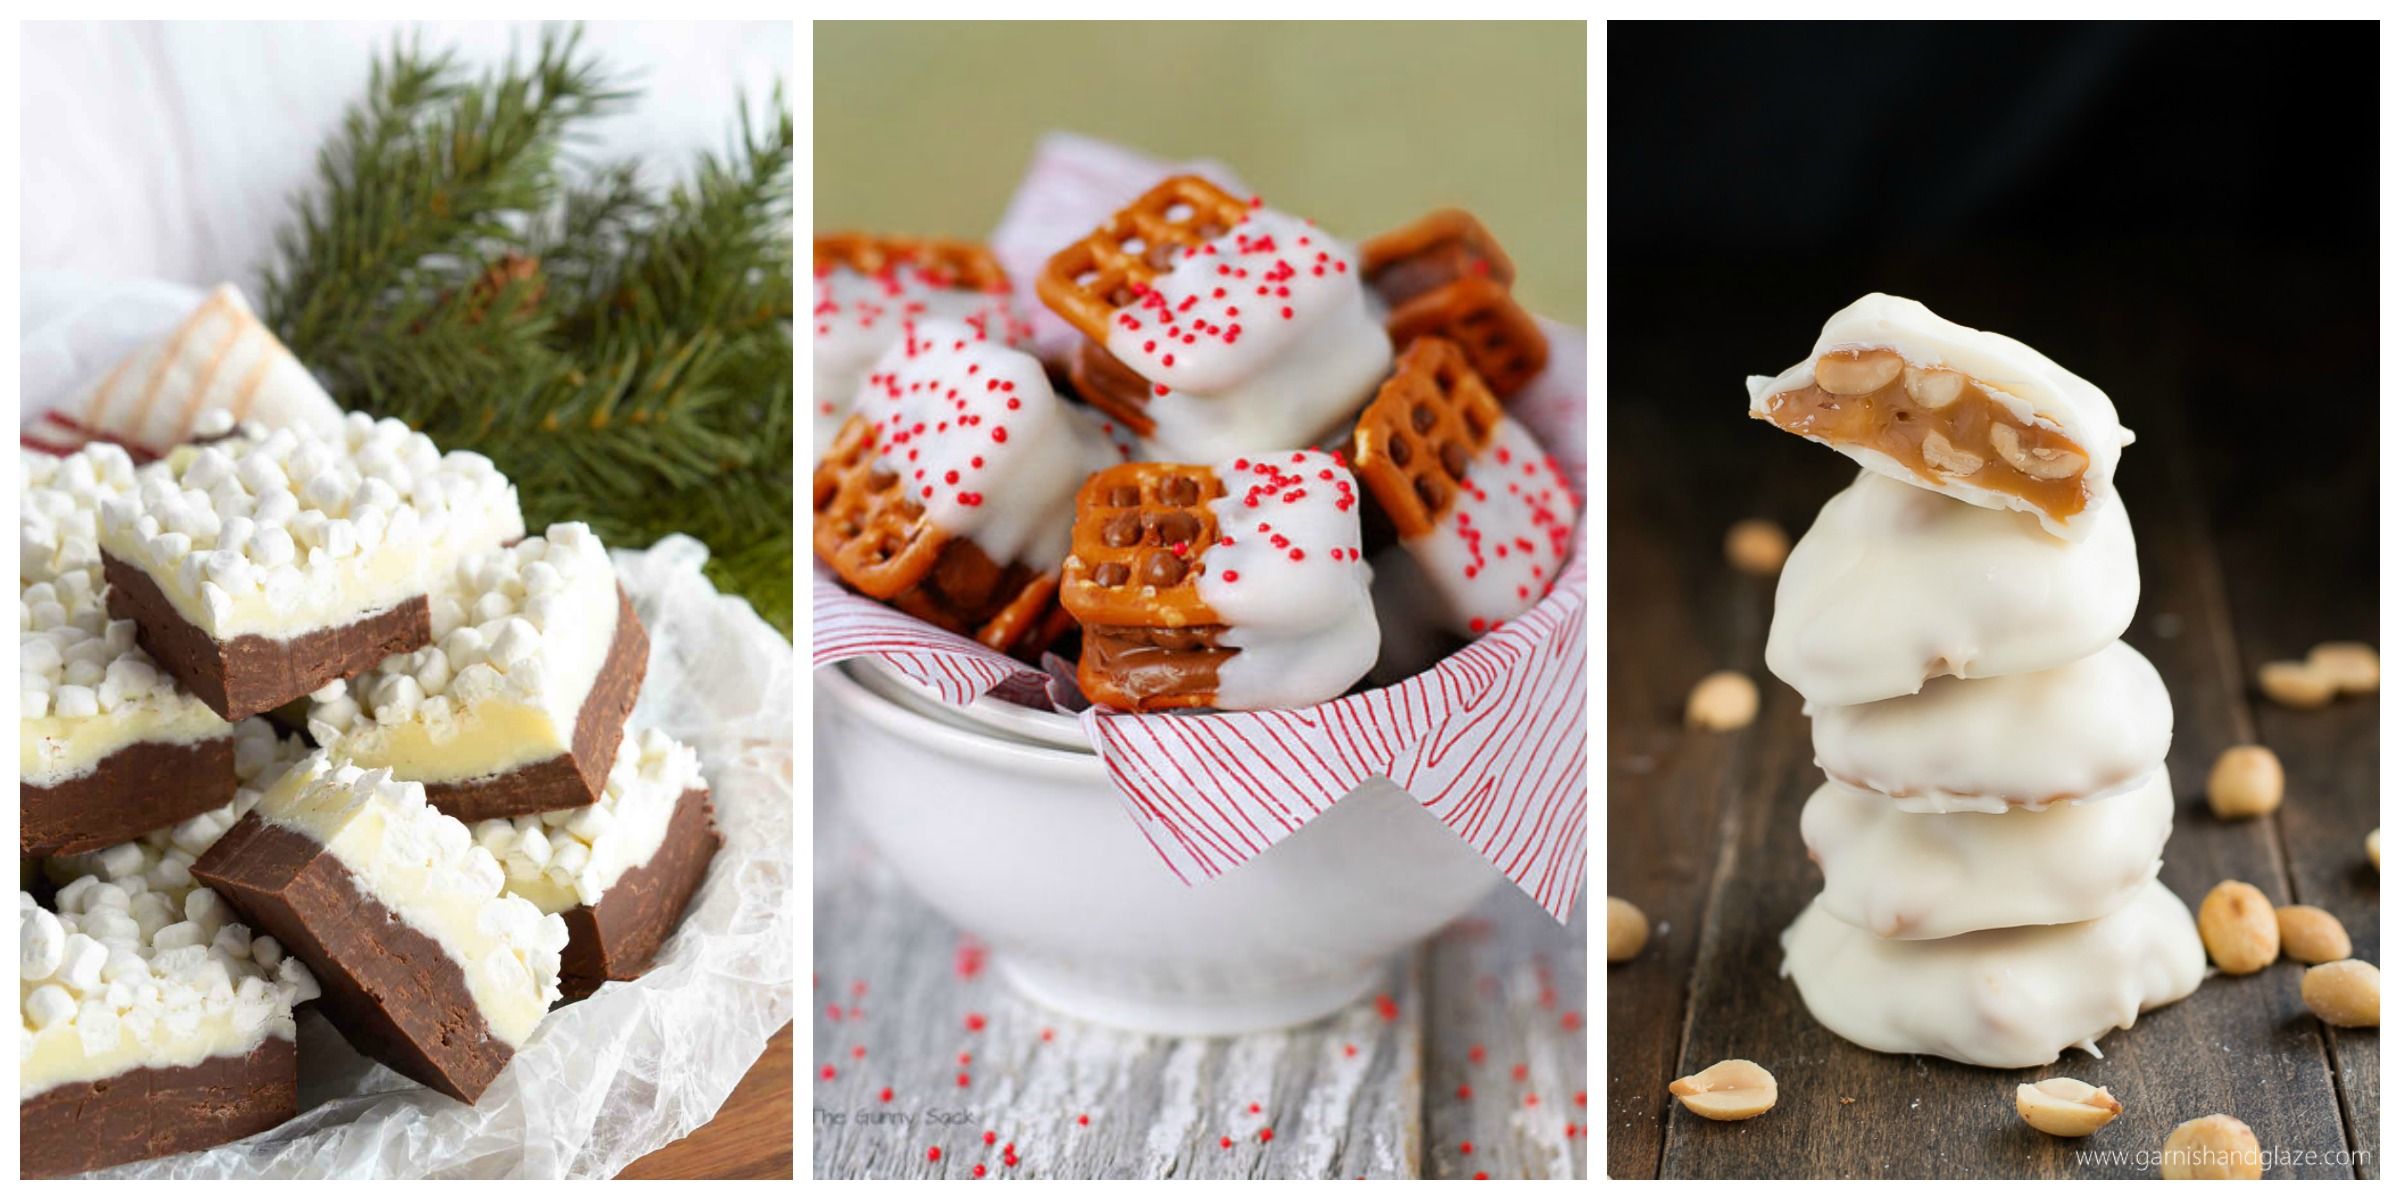 28 Homemade Christmas Candy Recipes - How To Make Your Own Holiday Candy